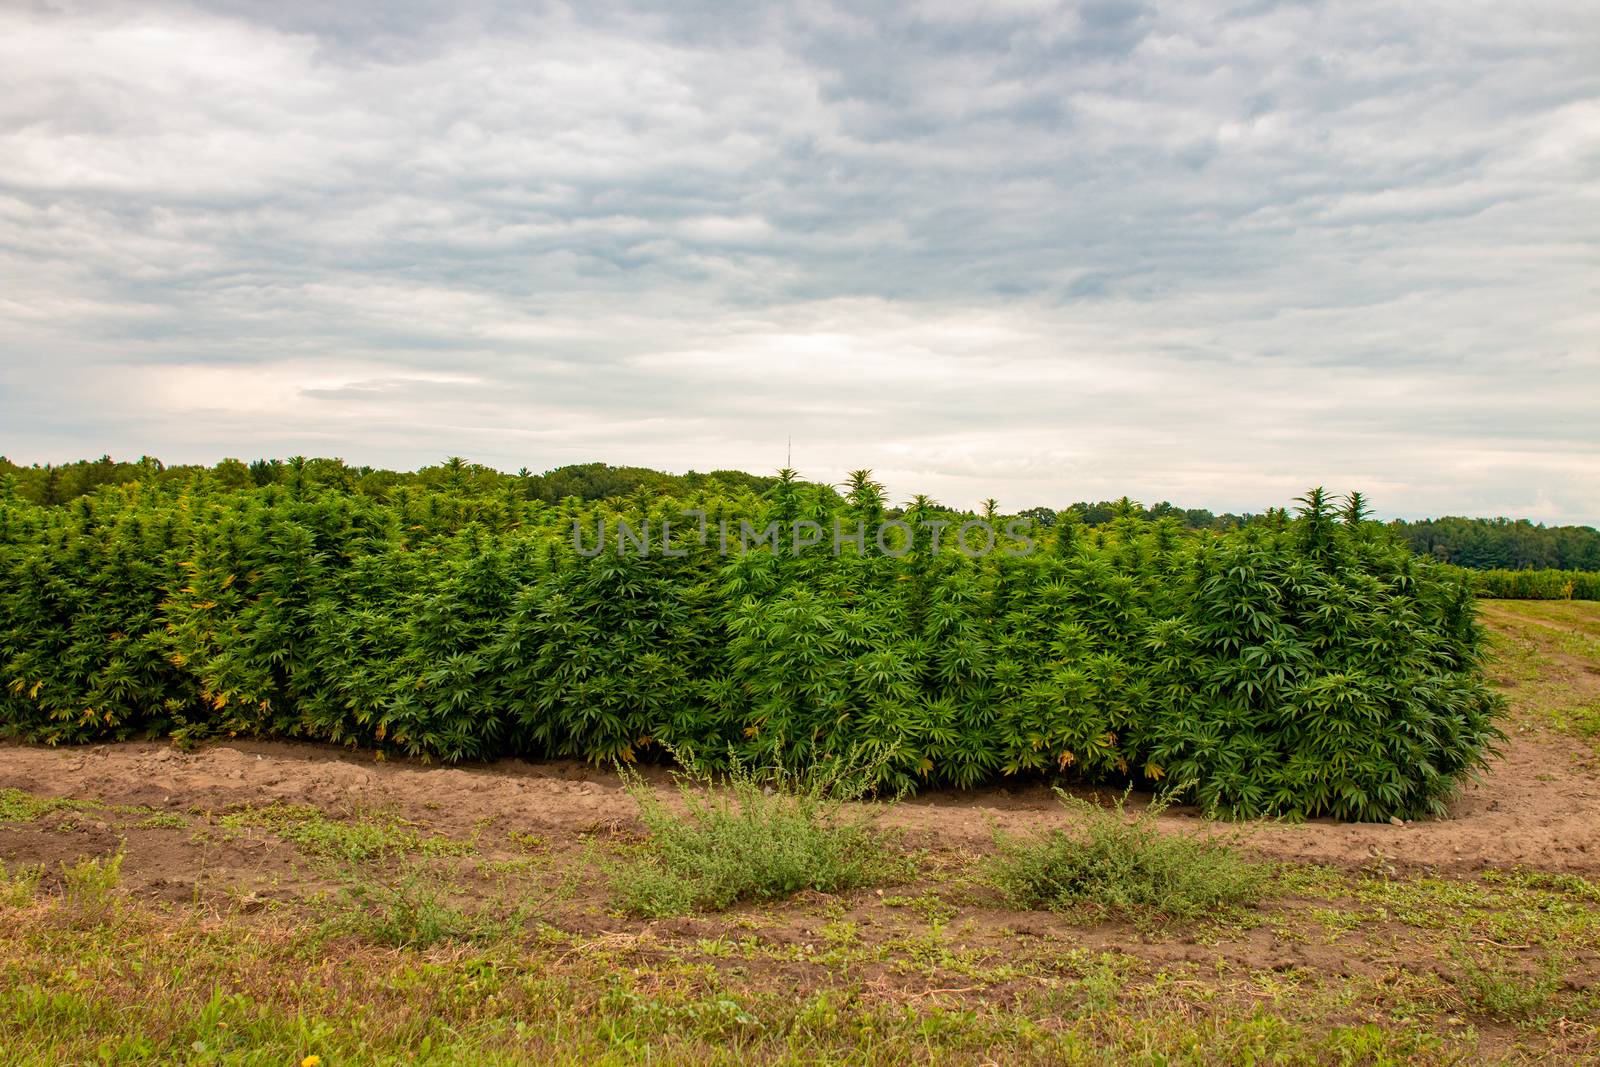 An industrial hemp field in Ontario canada. Hemp is a large agricultural industry with many uses. by mynewturtle1